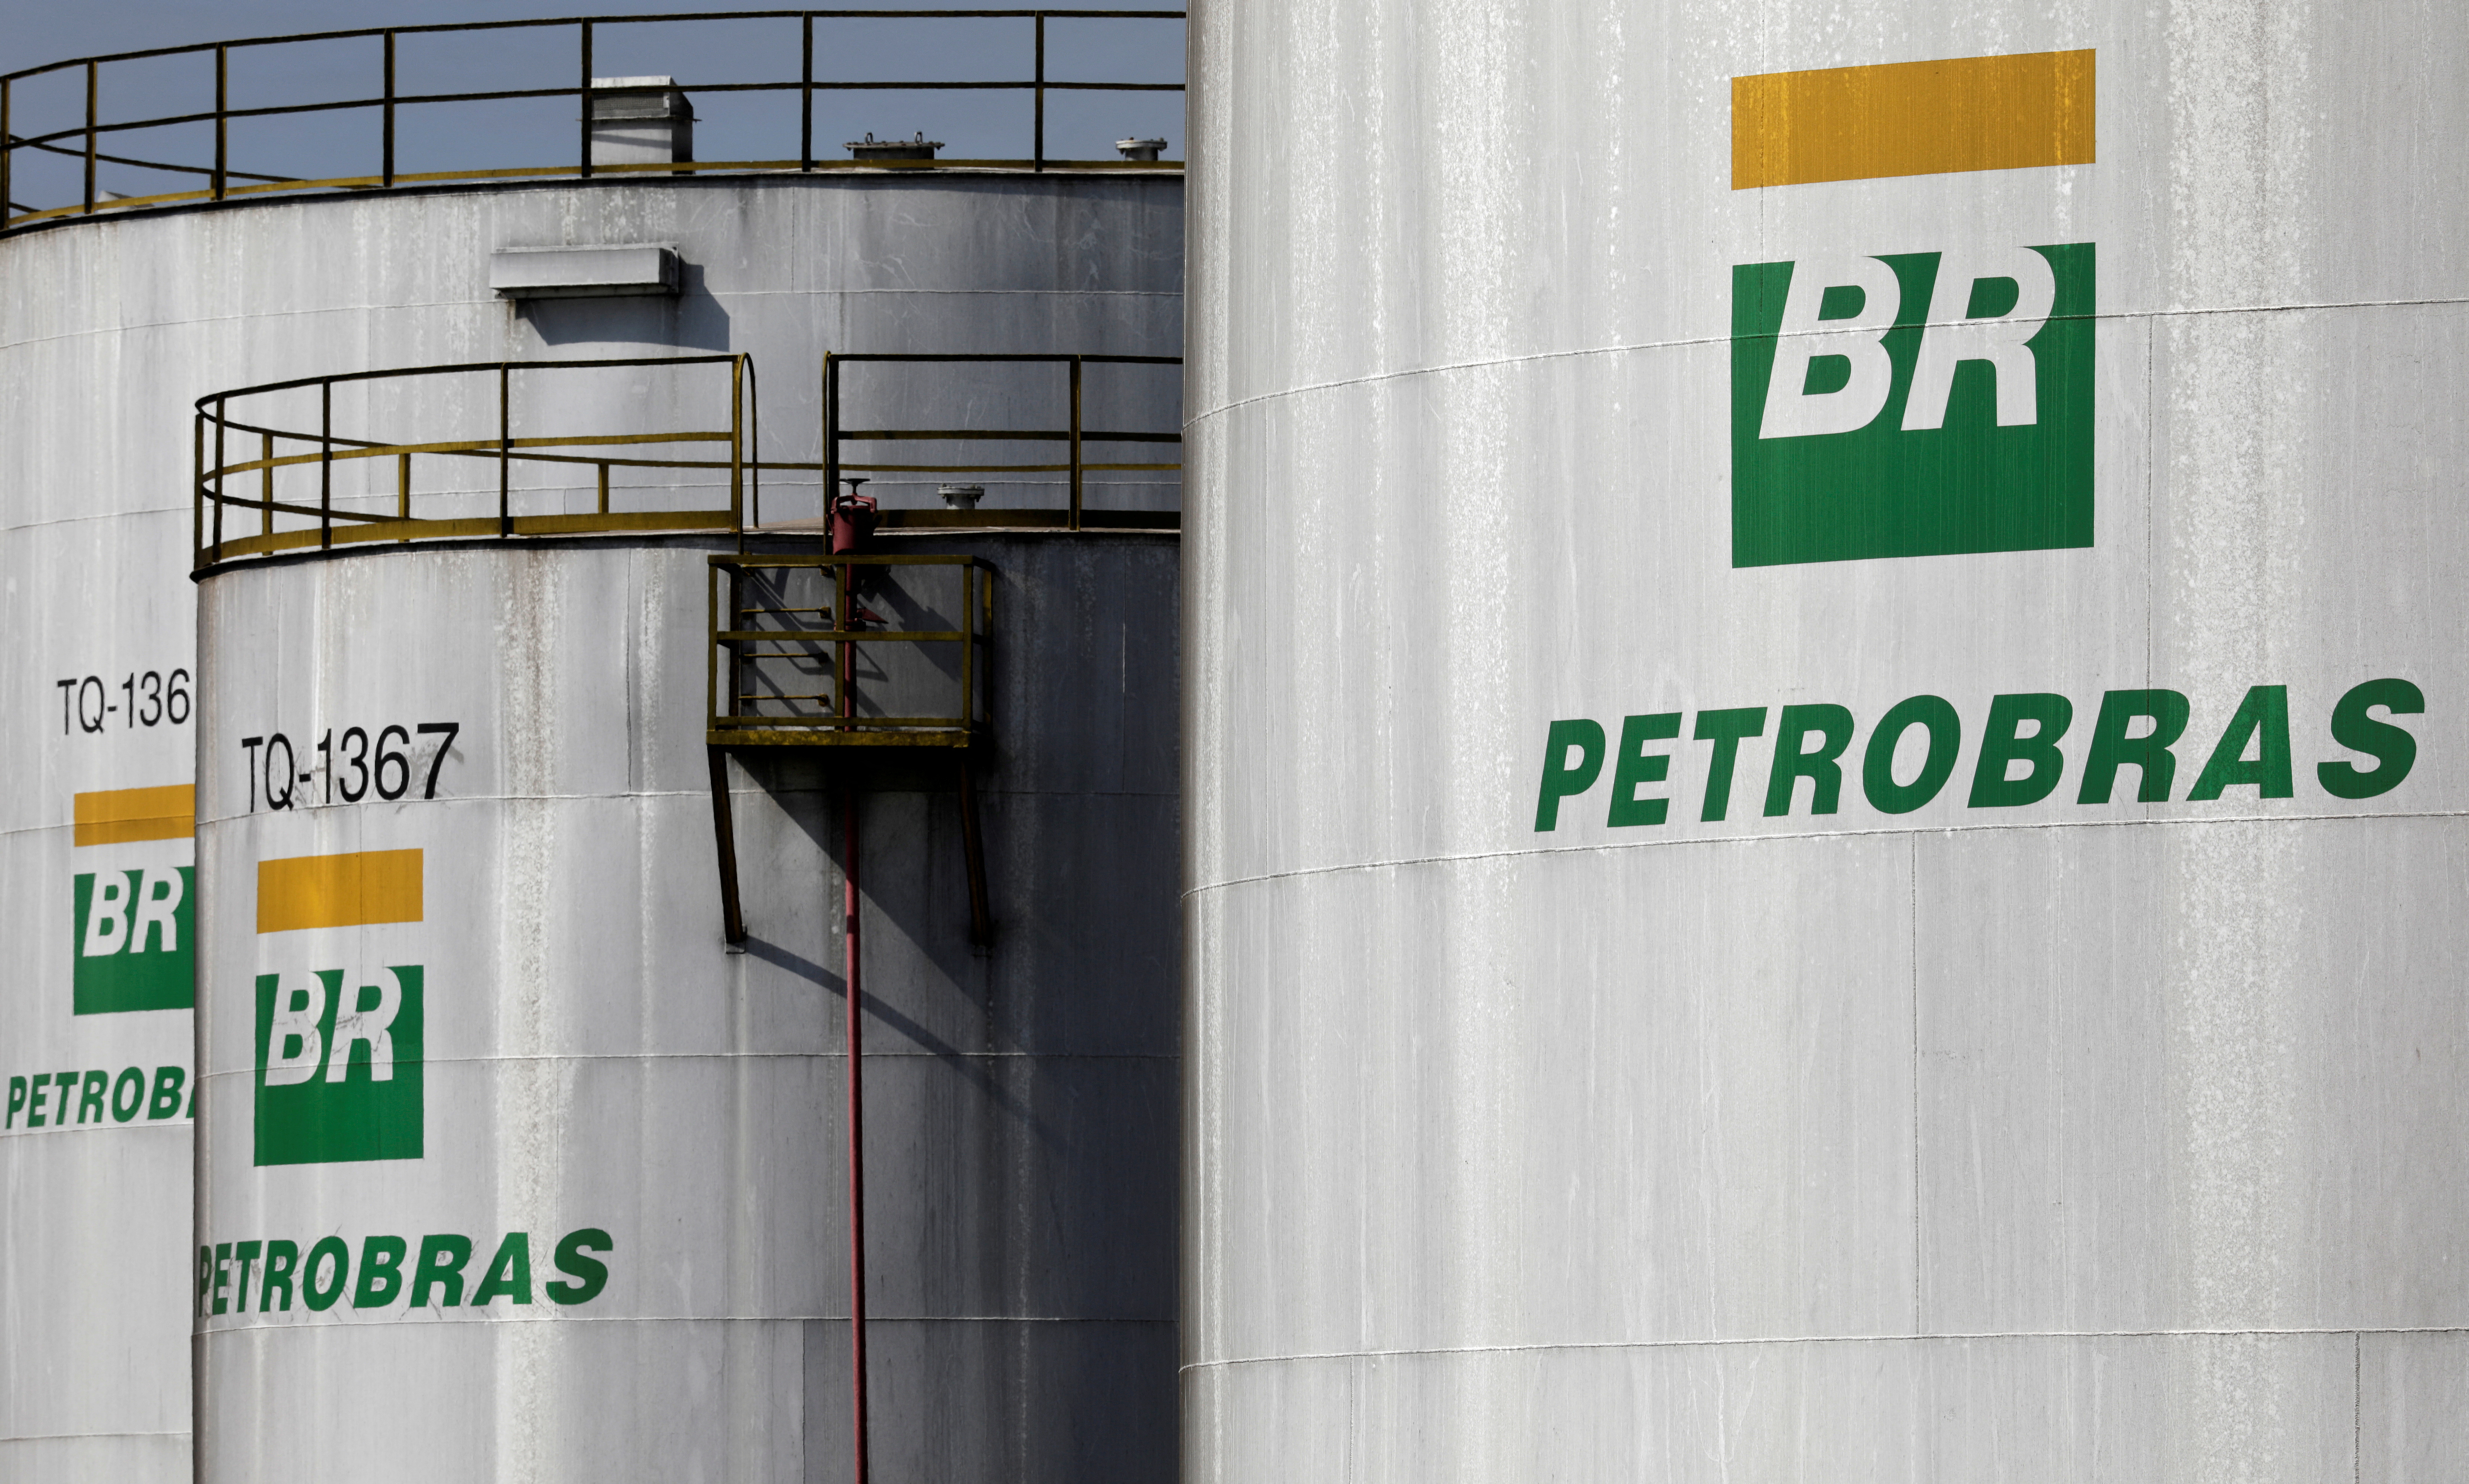 The logo of Brazil's state-run Petrobras oil company is seen on a tank in at Petrobras Paulinia refinery in Paulinia